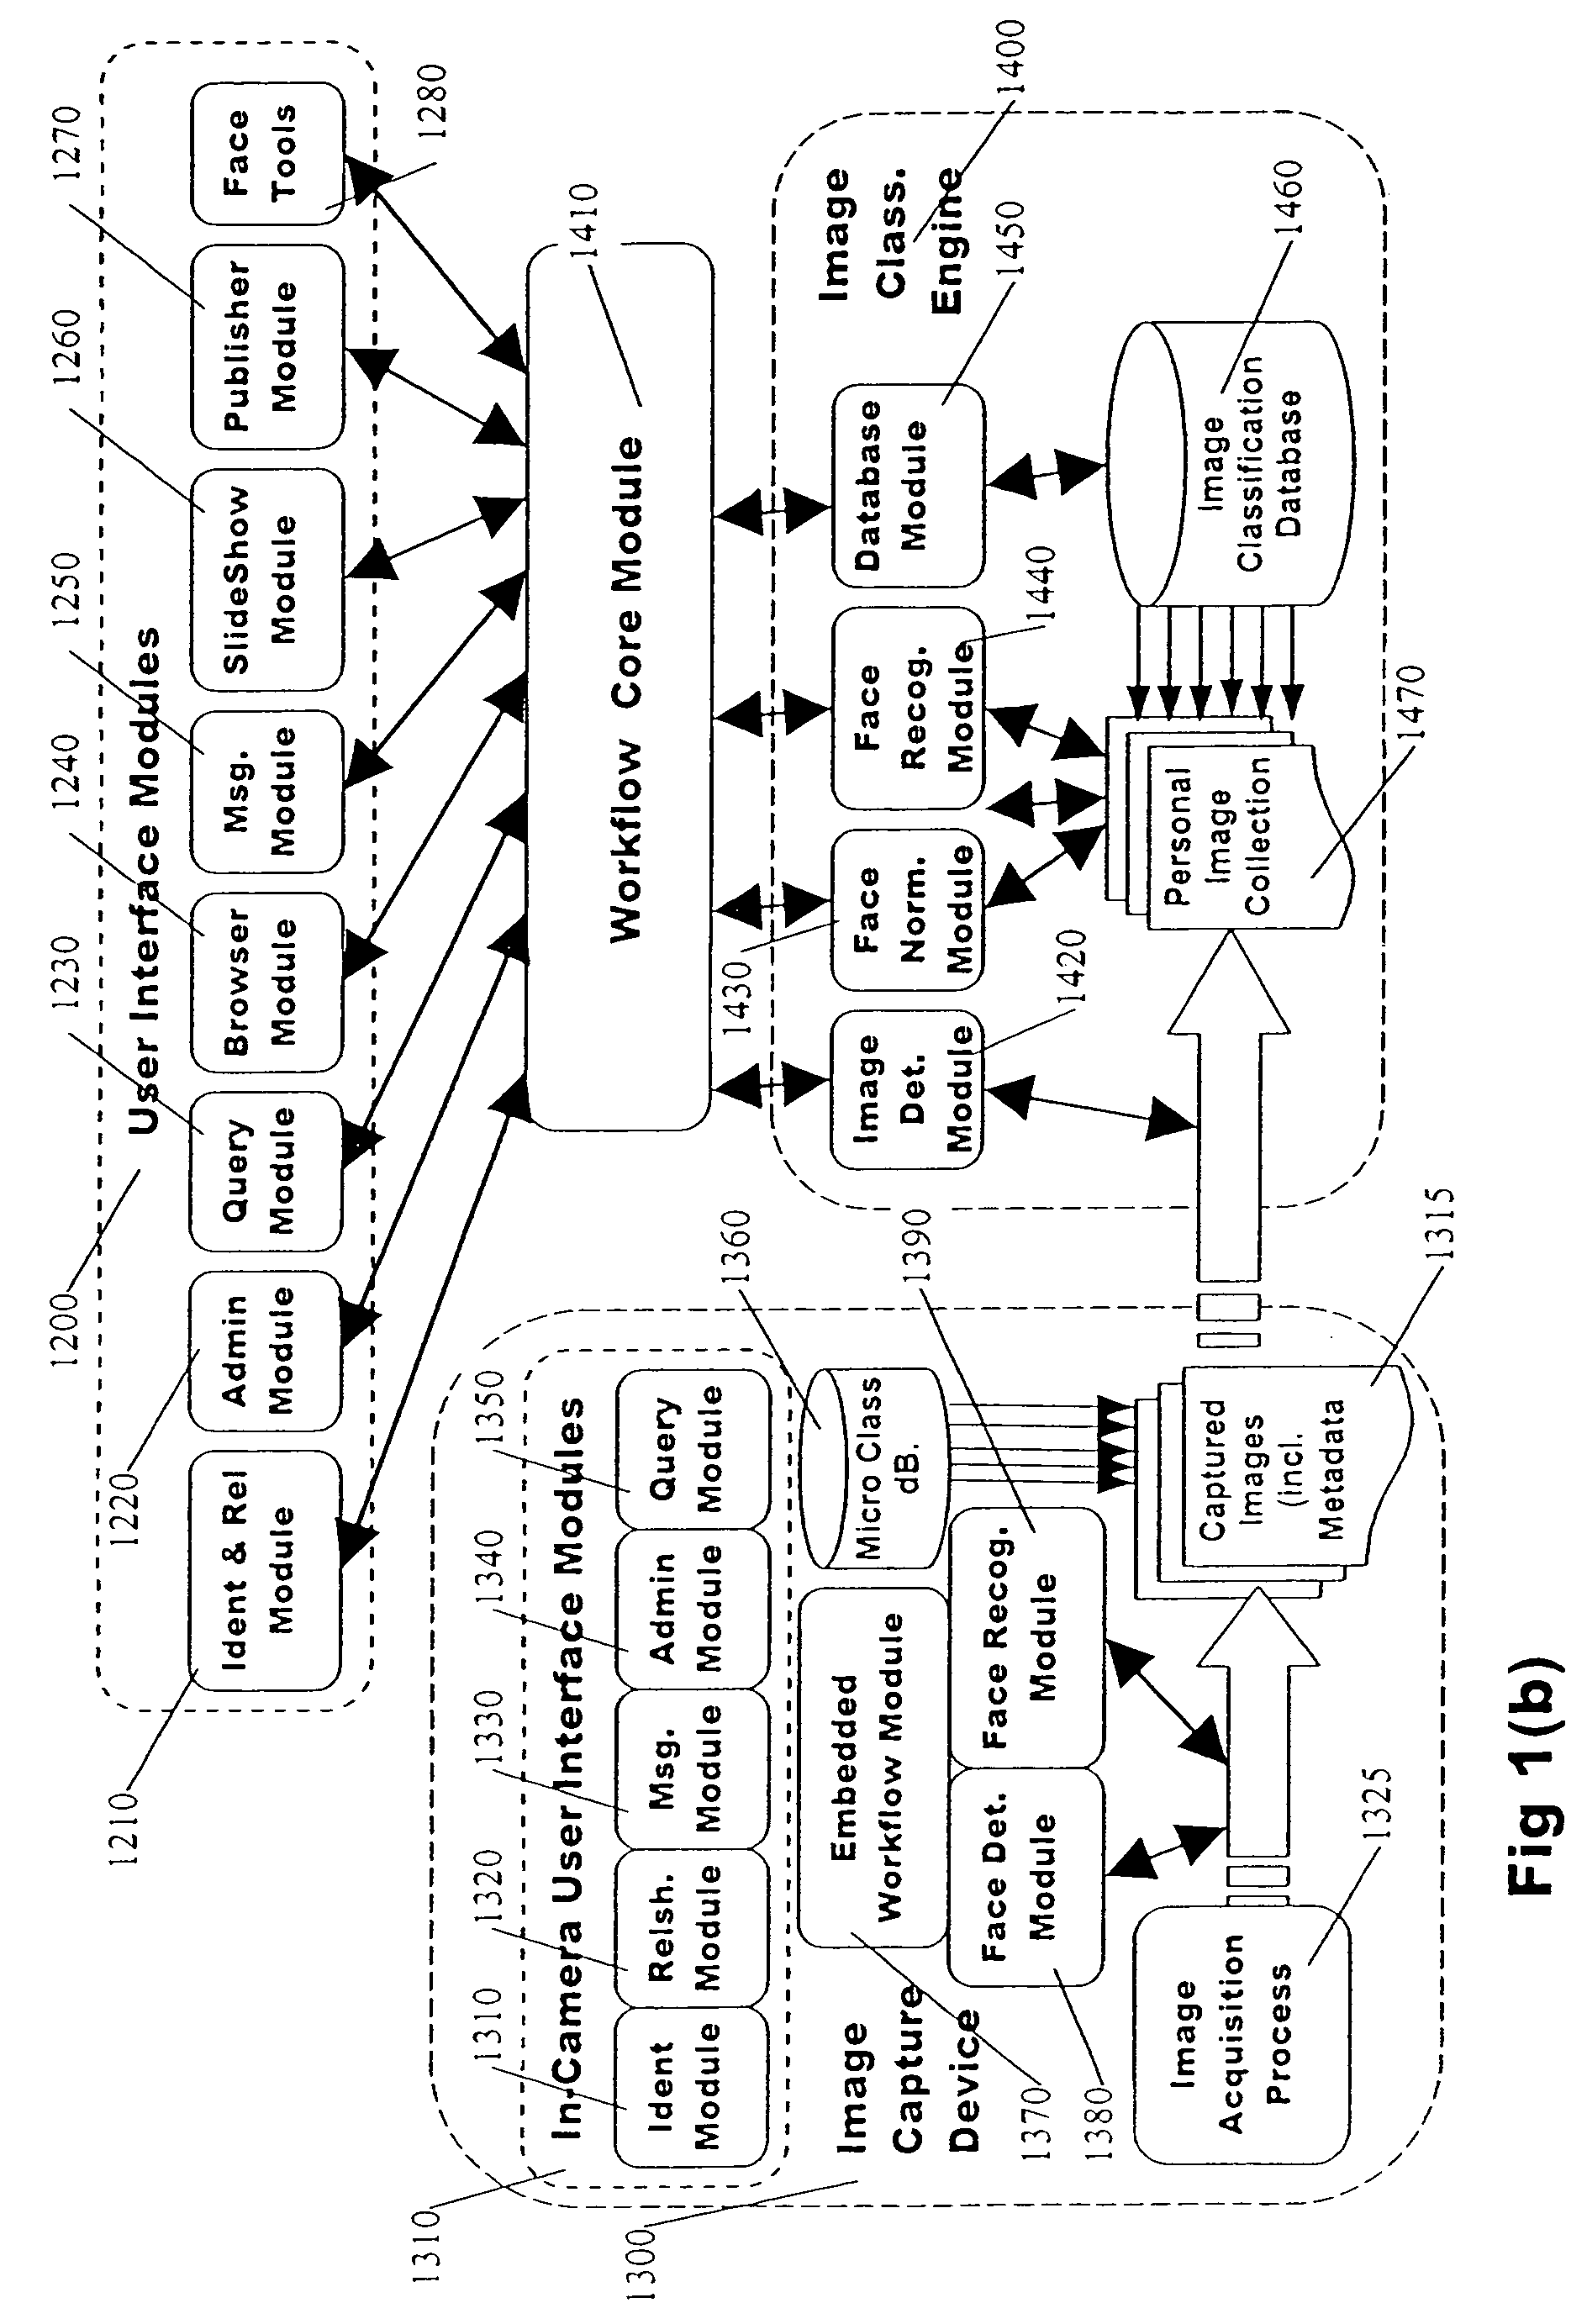 Classification system for consumer digital images using automatic workflow and face detection and recognition